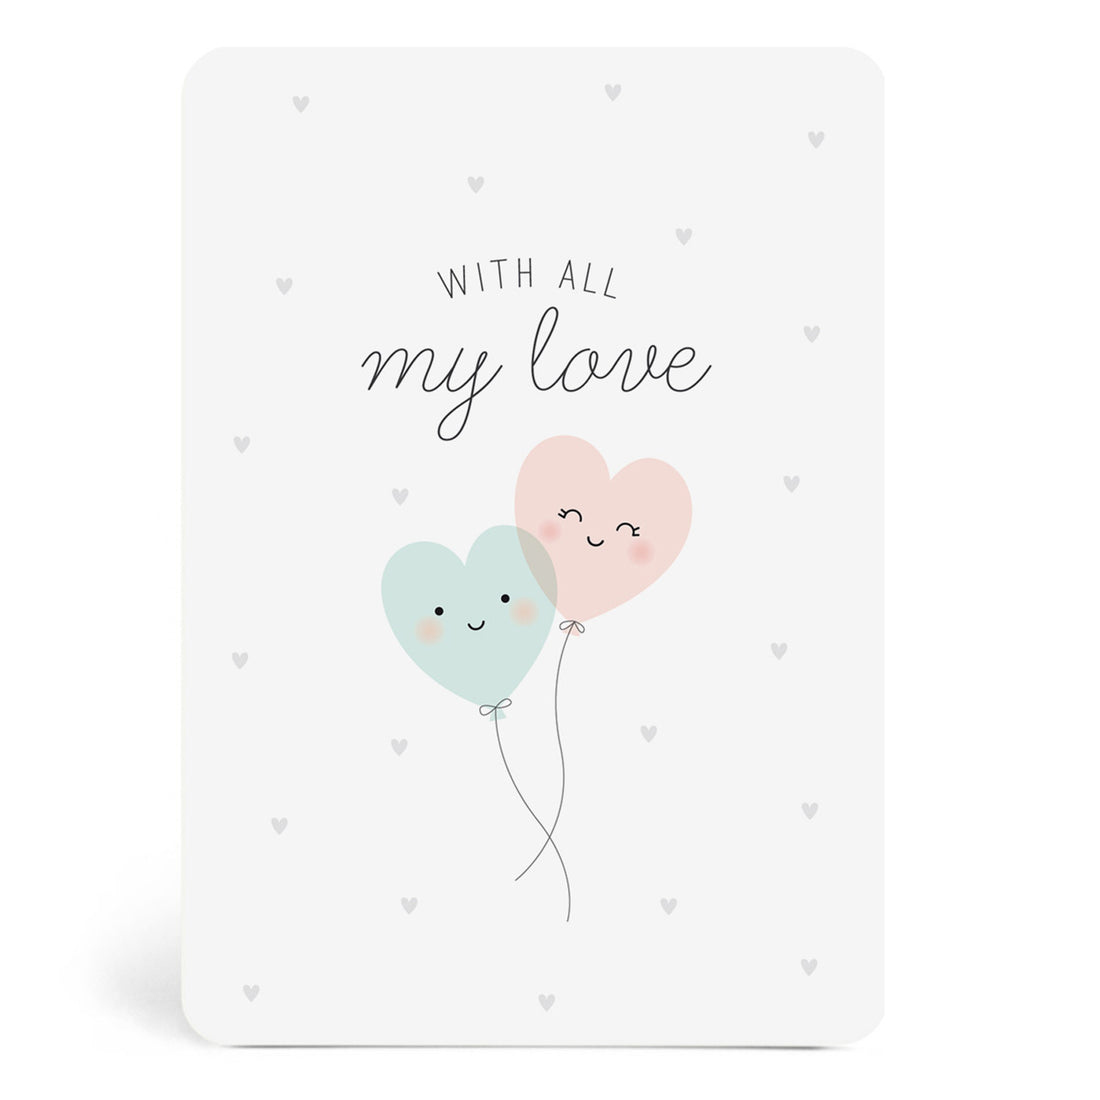 zu-boutique-card-with-all-my-love- (1)